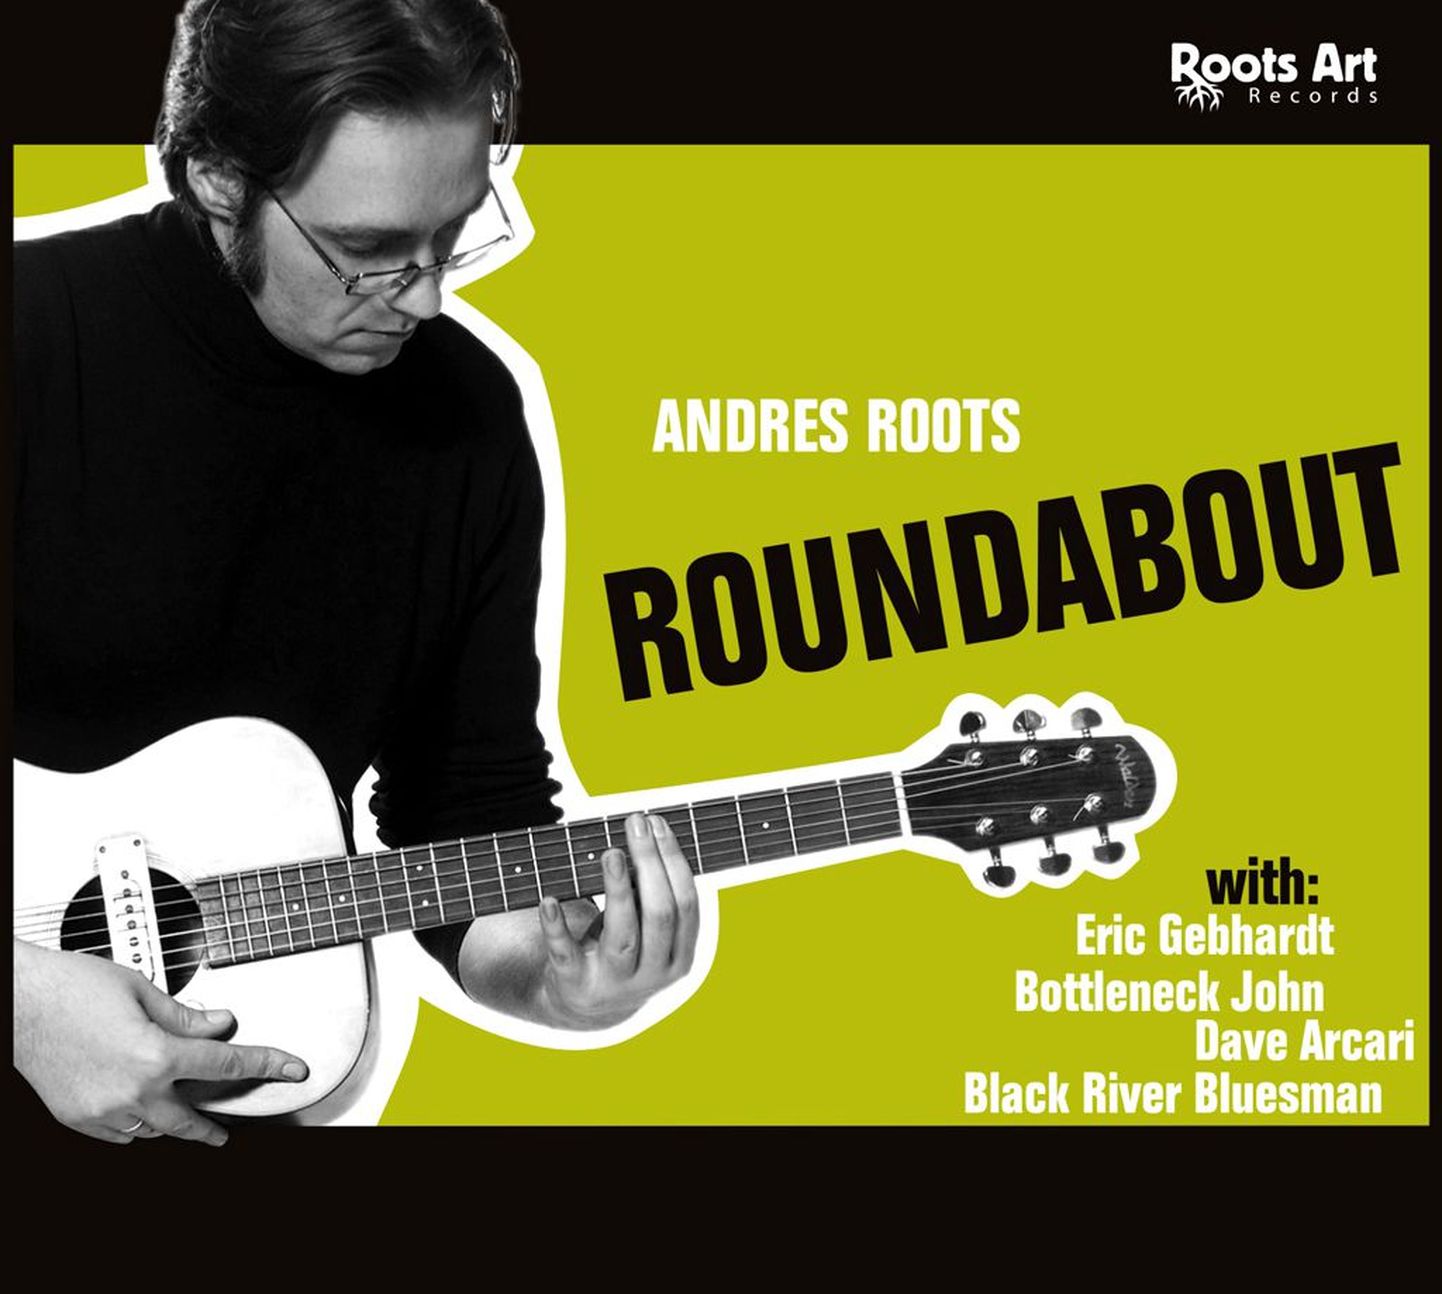 Andres Roots "Roundabout".